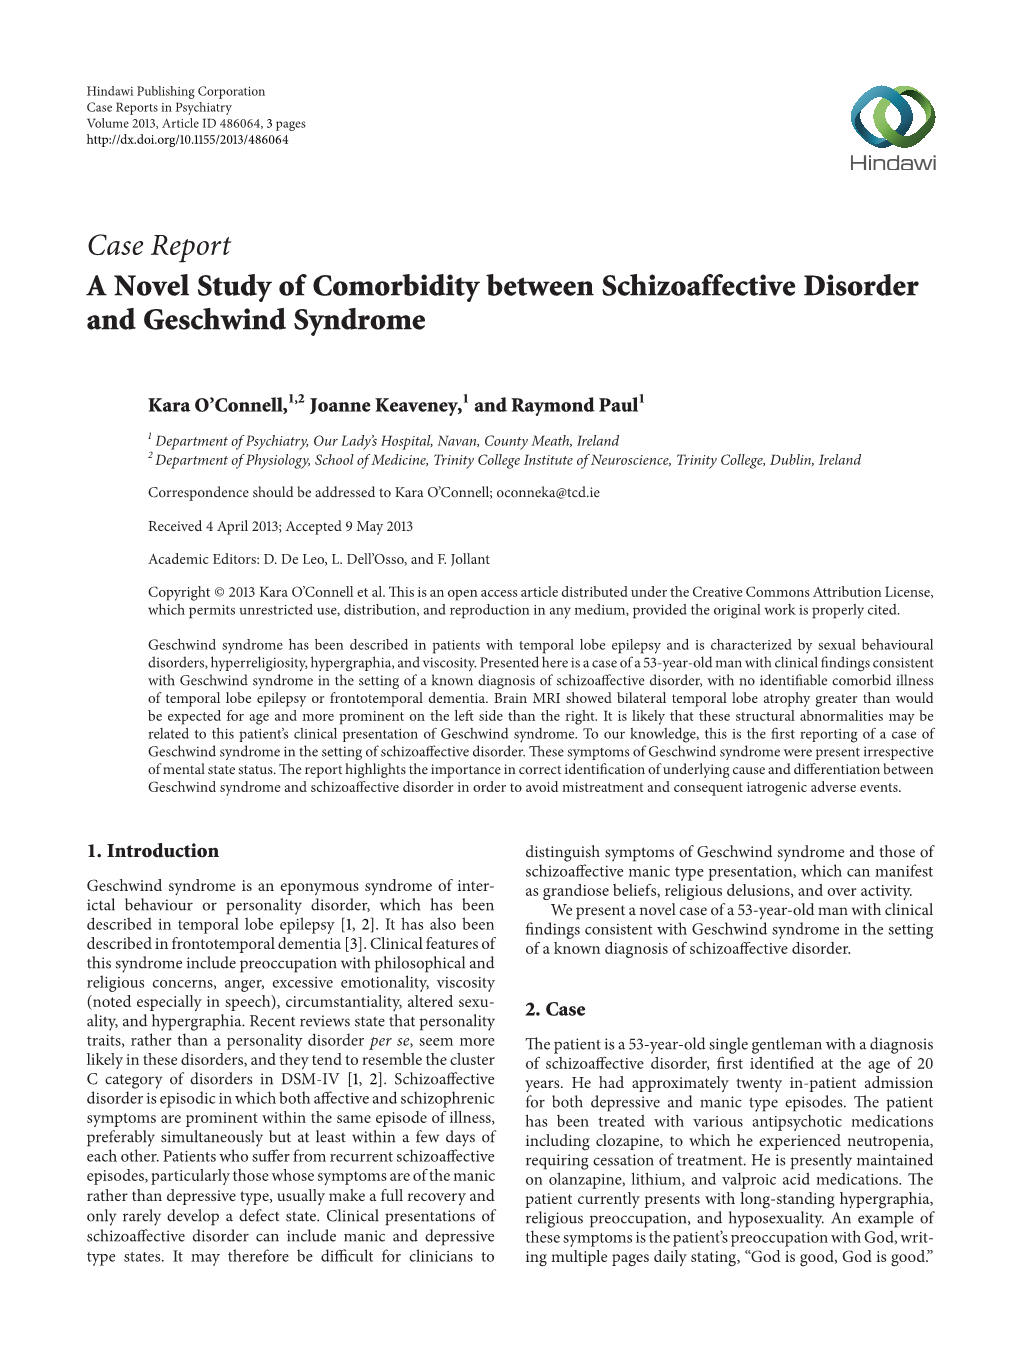 A Novel Study of Comorbidity Between Schizoaffective Disorder and Geschwind Syndrome